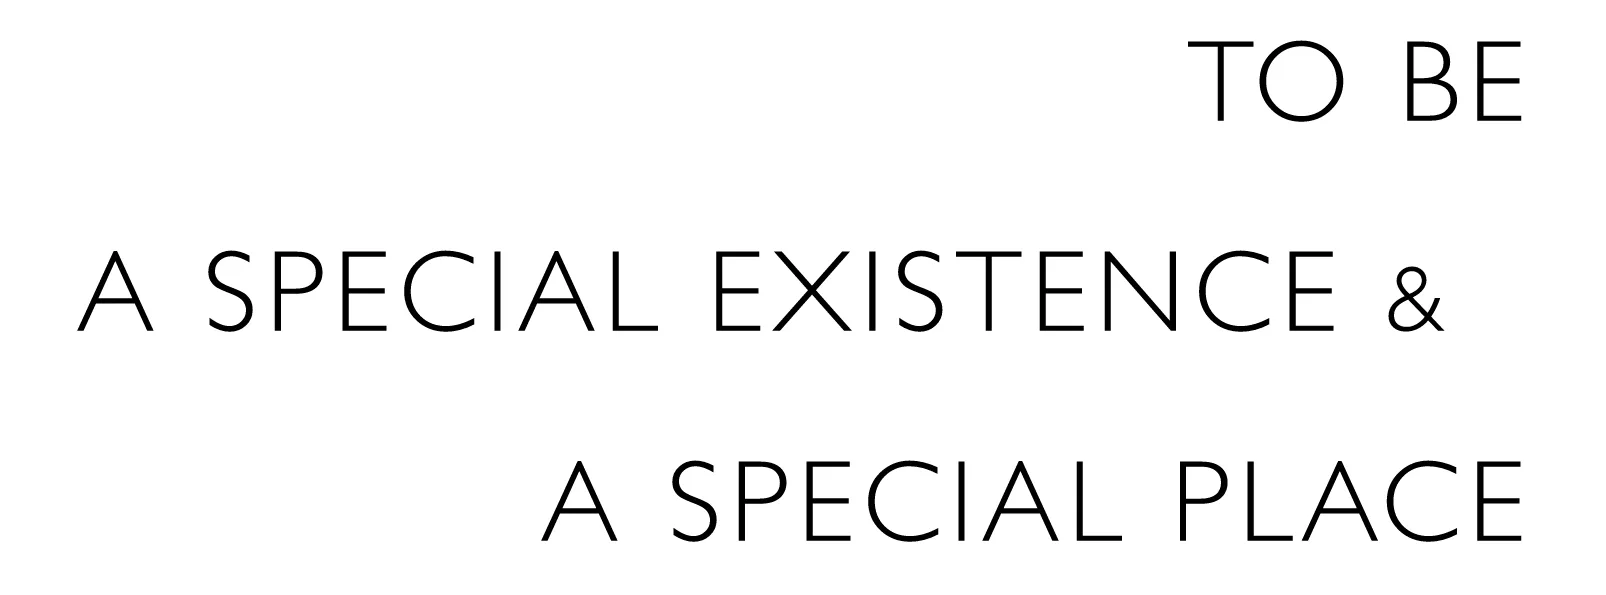 To be a special existence & a special place